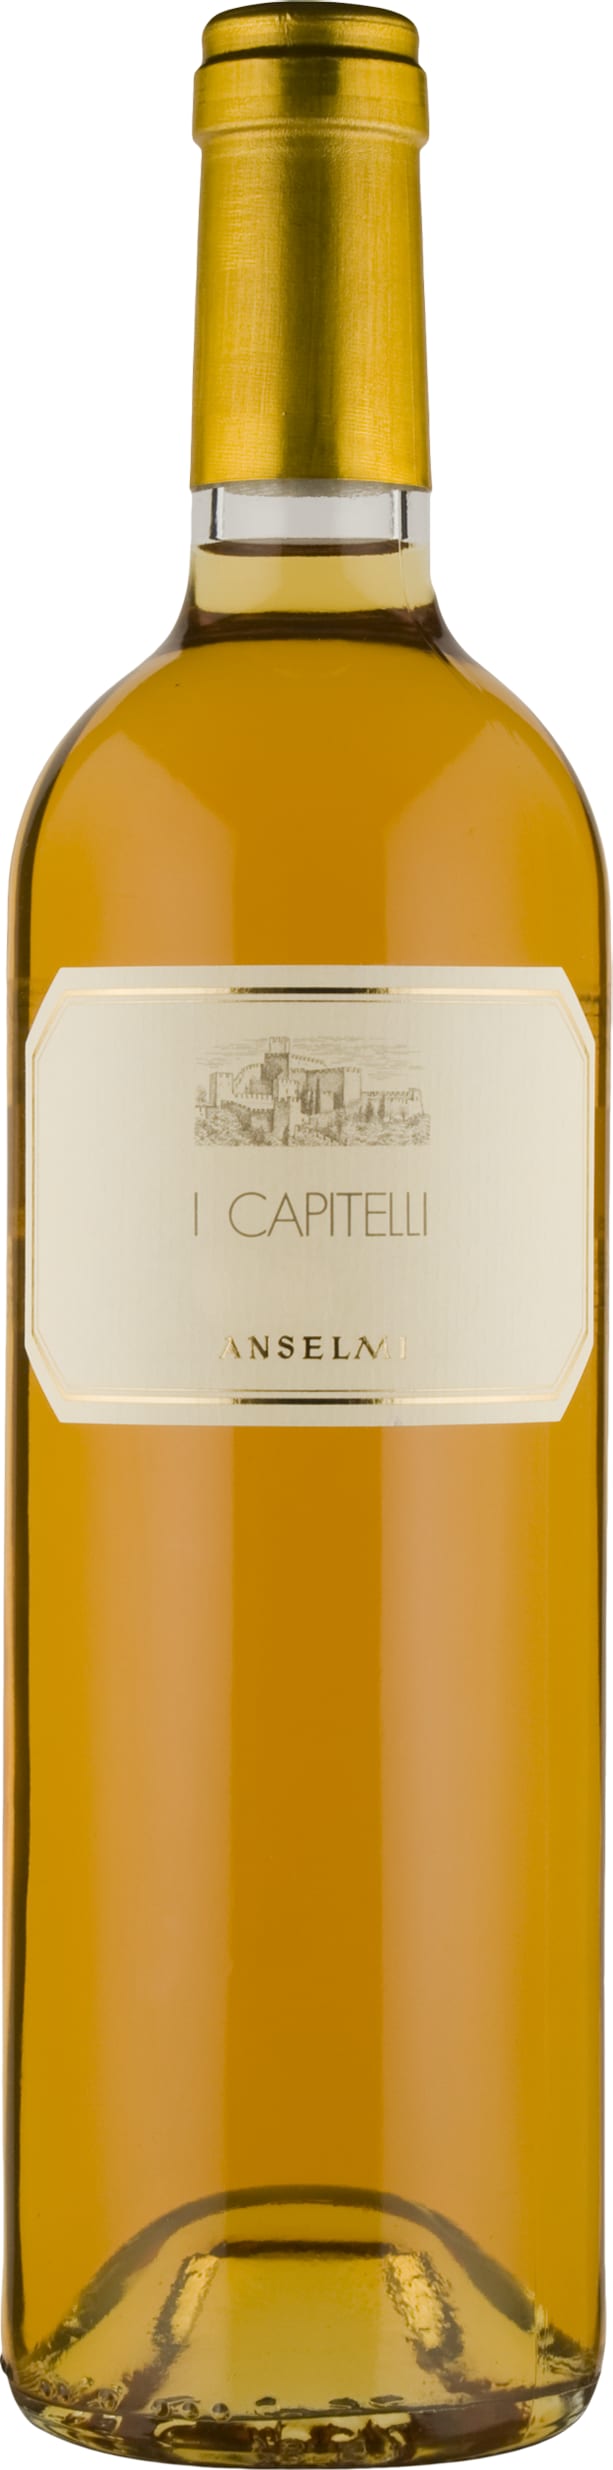 Anselmi I Capitelli IGT 375cl 2022 37.5cl - Buy Anselmi Wines from GREAT WINES DIRECT wine shop